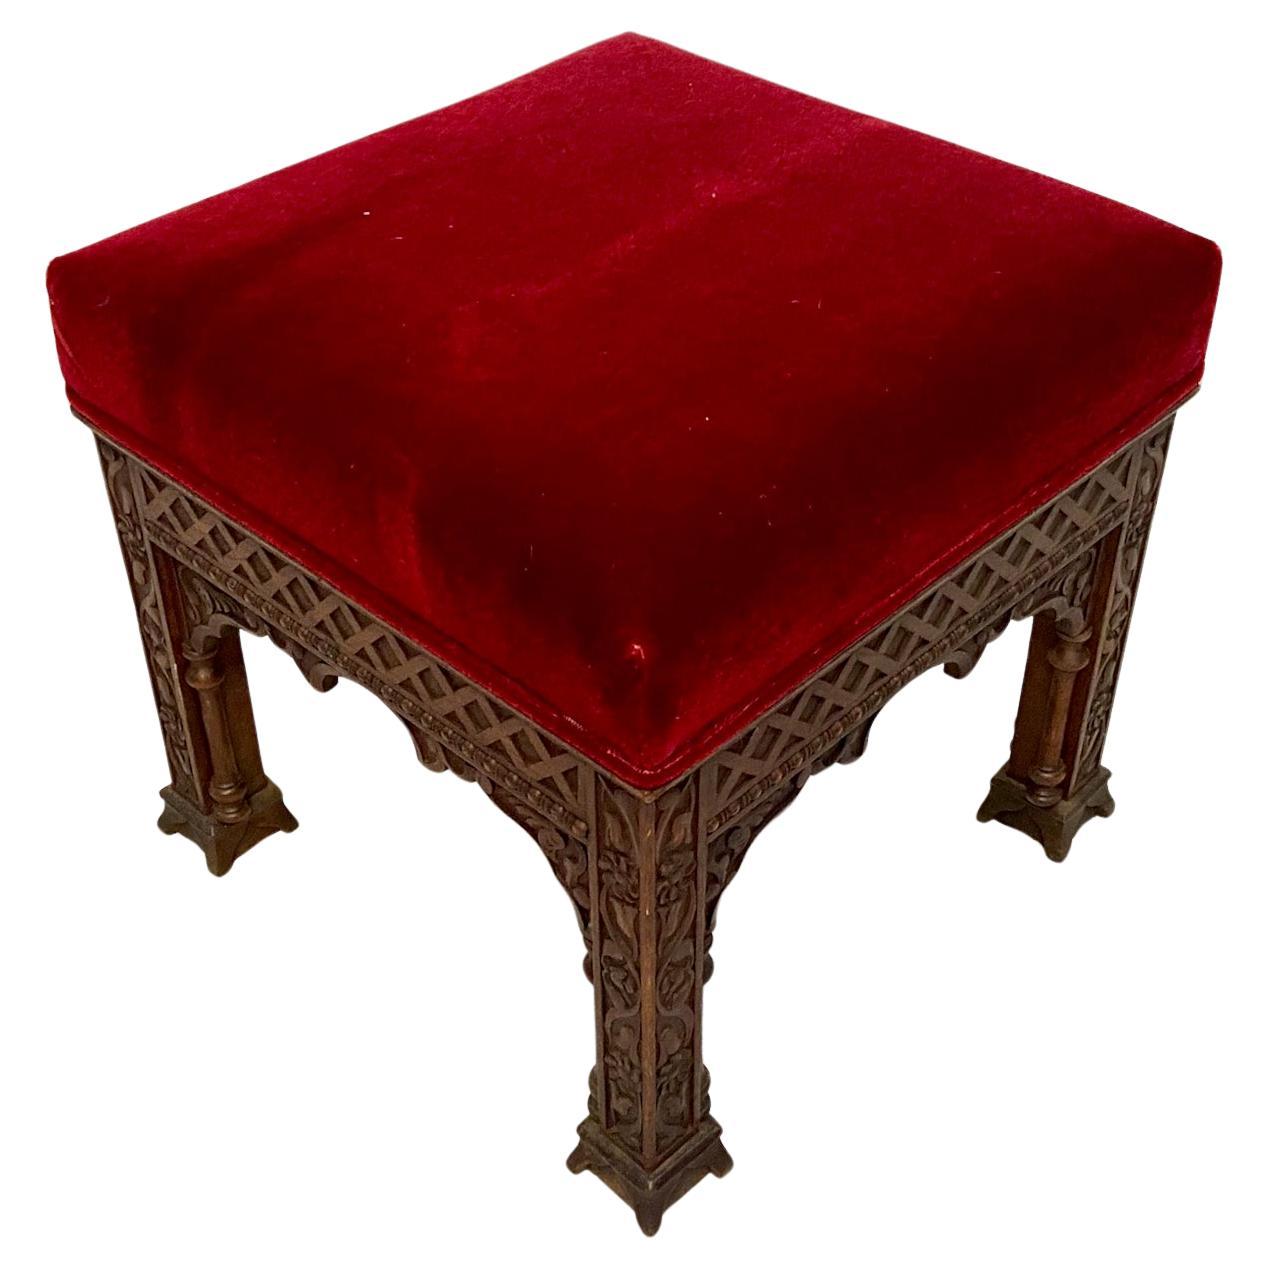 British intricate Victorian, Arts and Crafts Moorish Style Stool, possibly Liberty For Sale